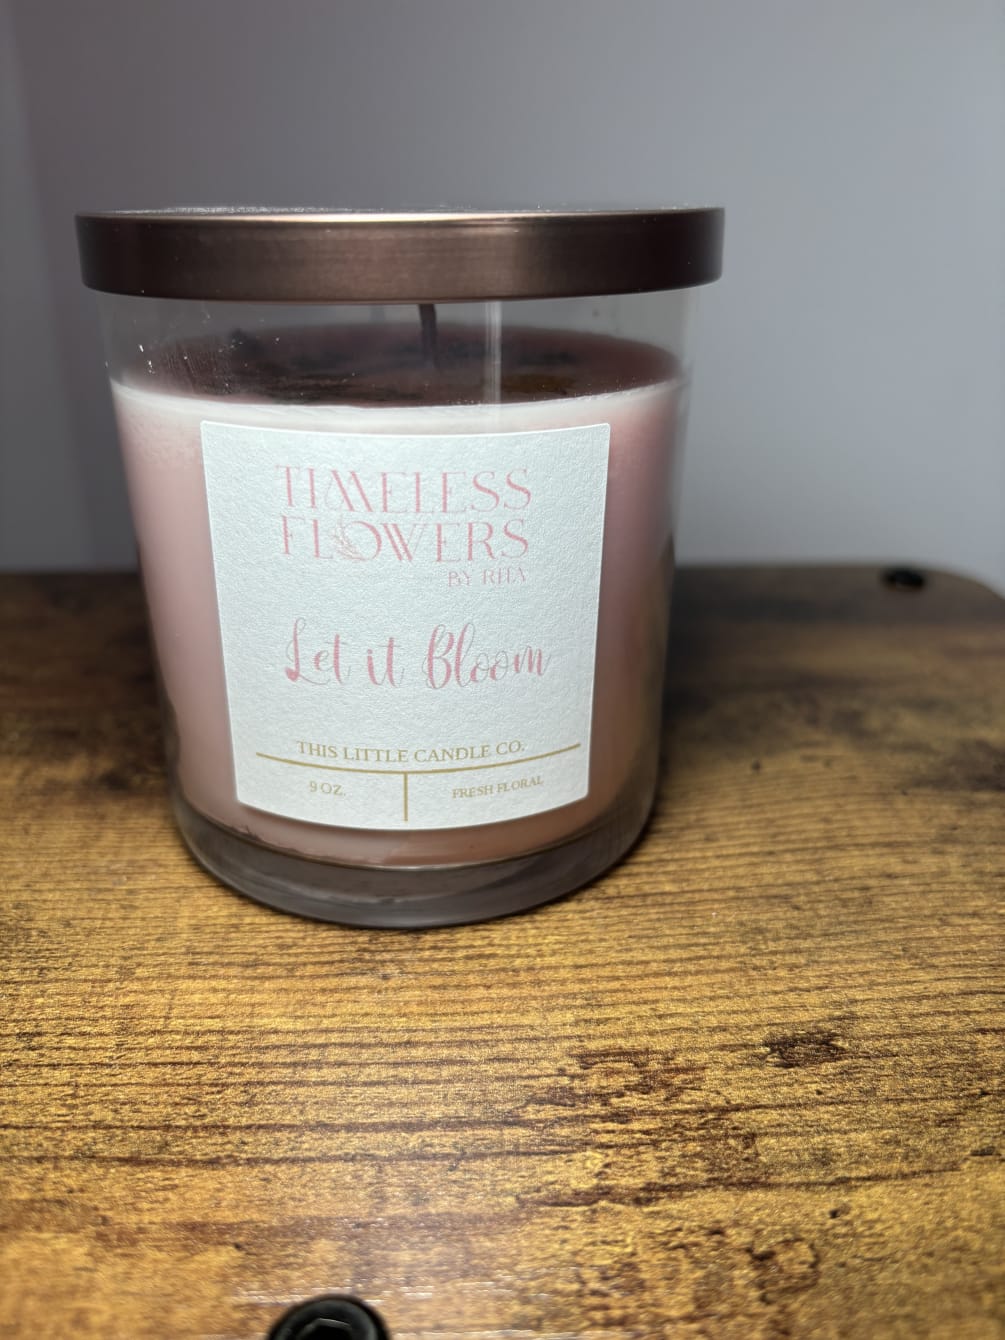 One of the best selling candles at Timeless Flowers Fresh Floral. A